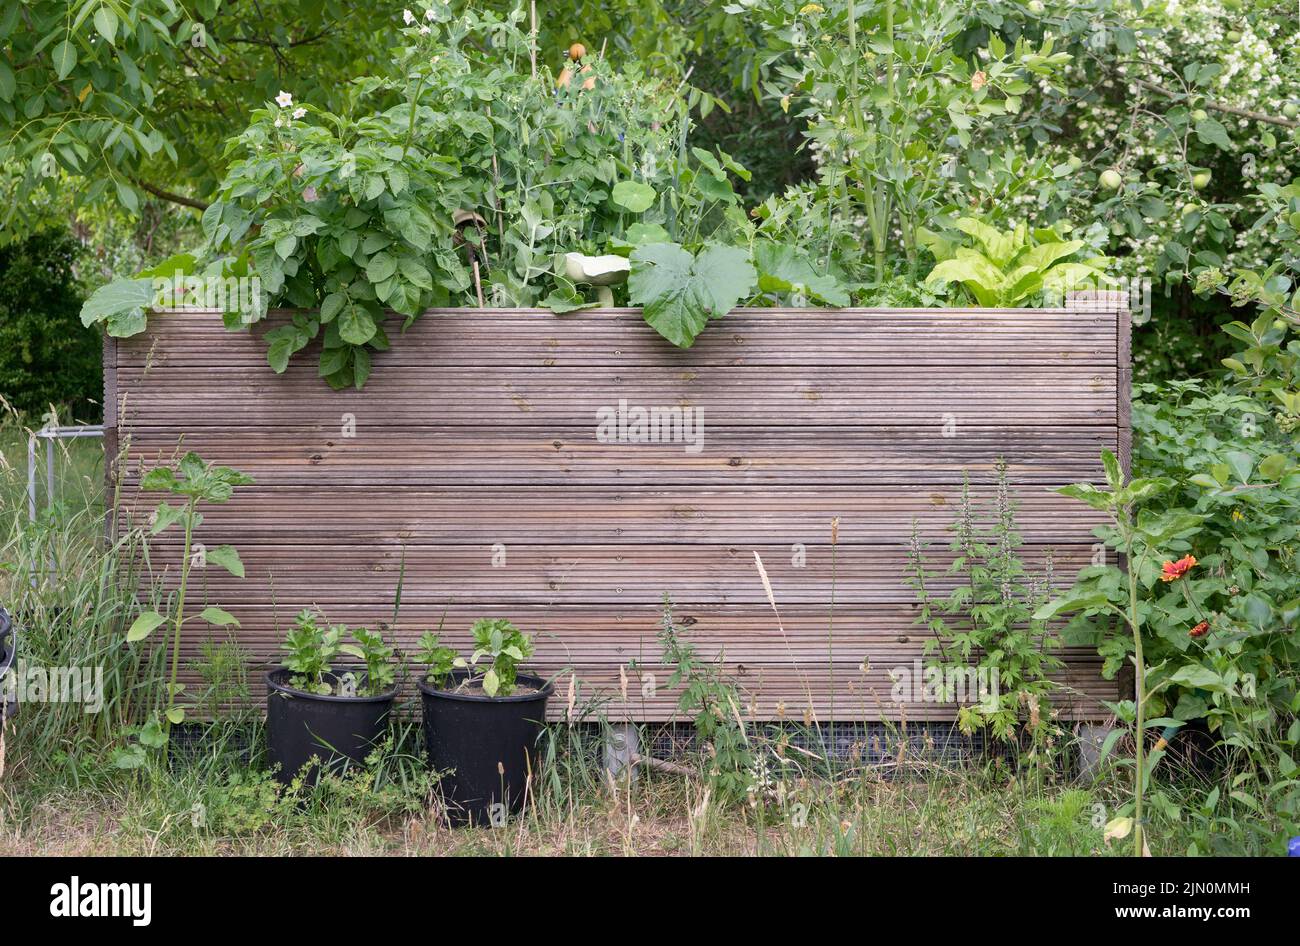 Raised bed in the garden with vegetables, herbs and flowers Stock Photo